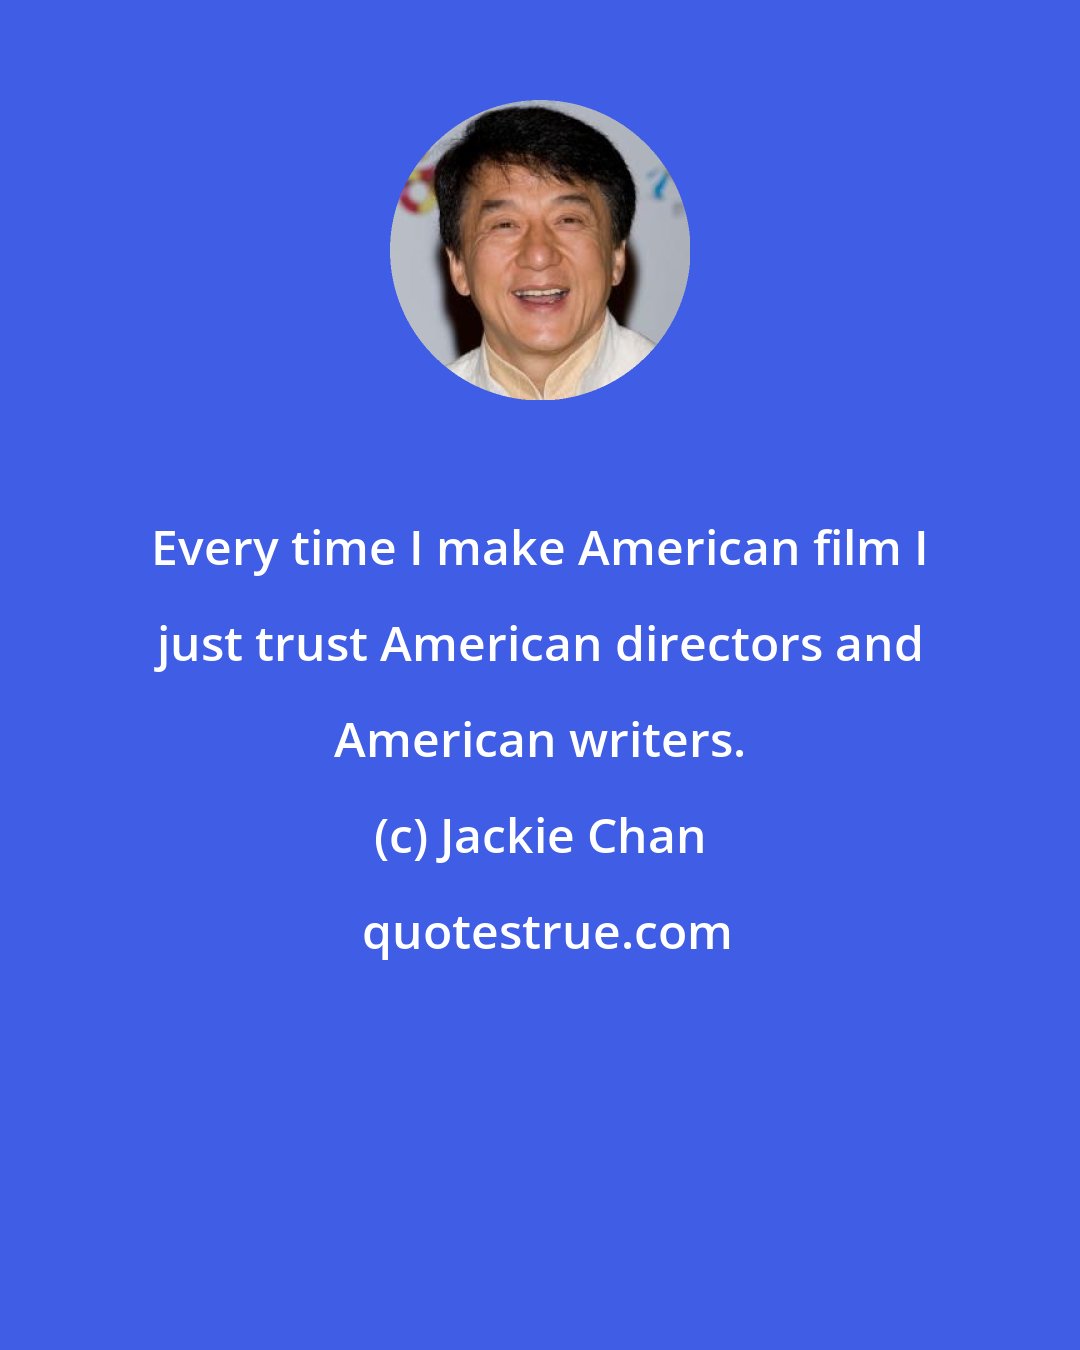 Jackie Chan: Every time I make American film I just trust American directors and American writers.